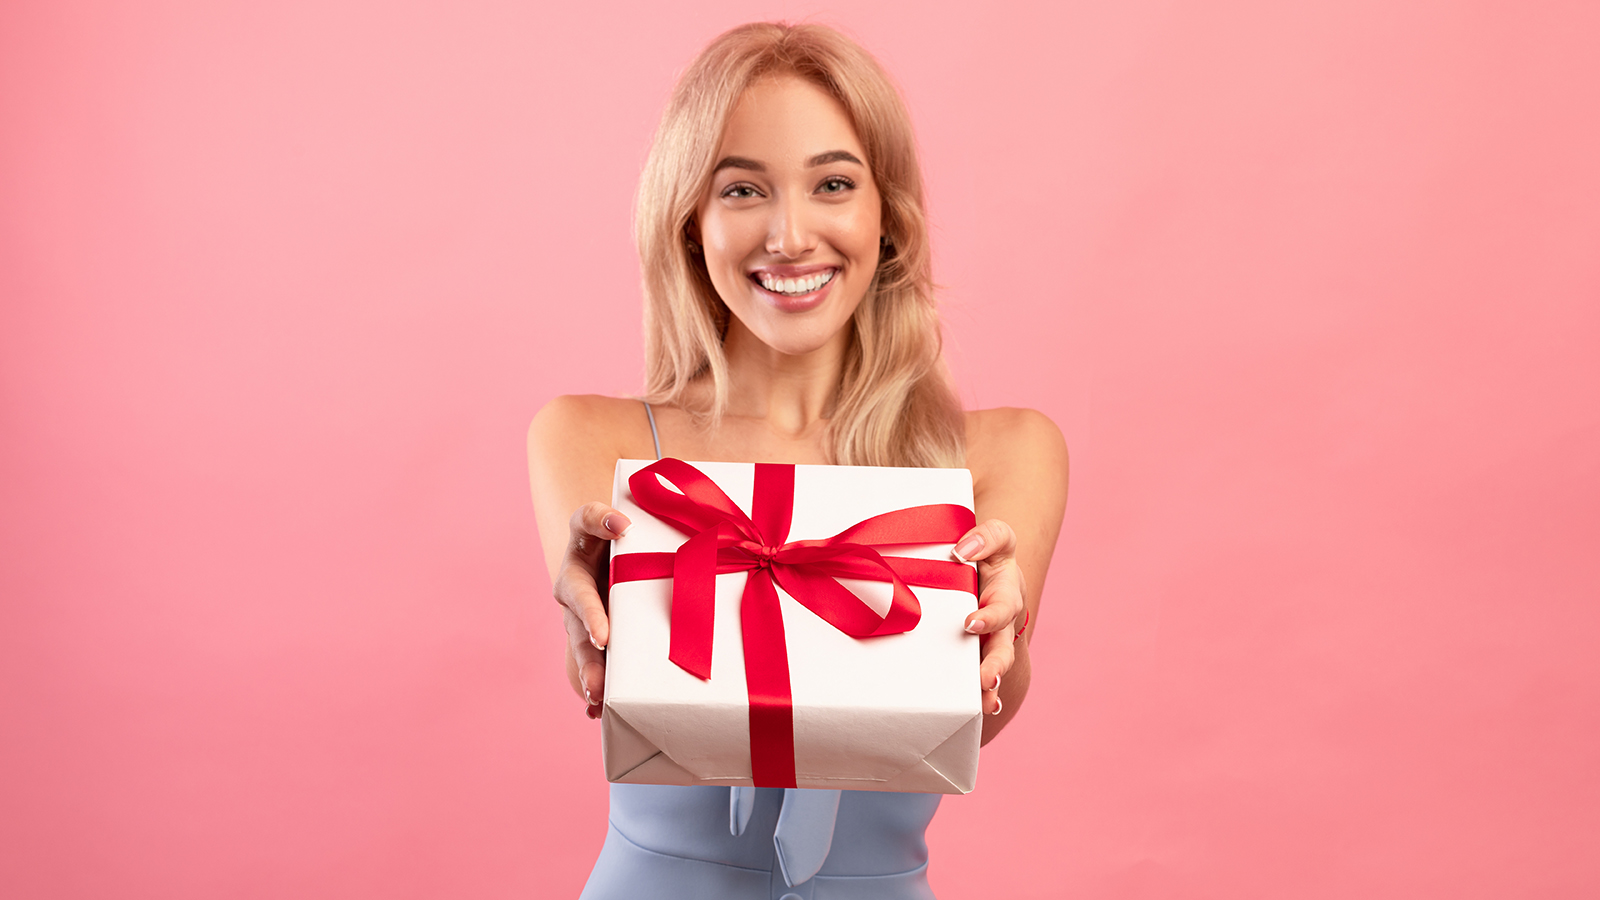 Lovely young woman giving wrapped gift box at camera over pink studio background. Cheerful millennial lady offering holiday present with smile, celebrating birthday or anniversary